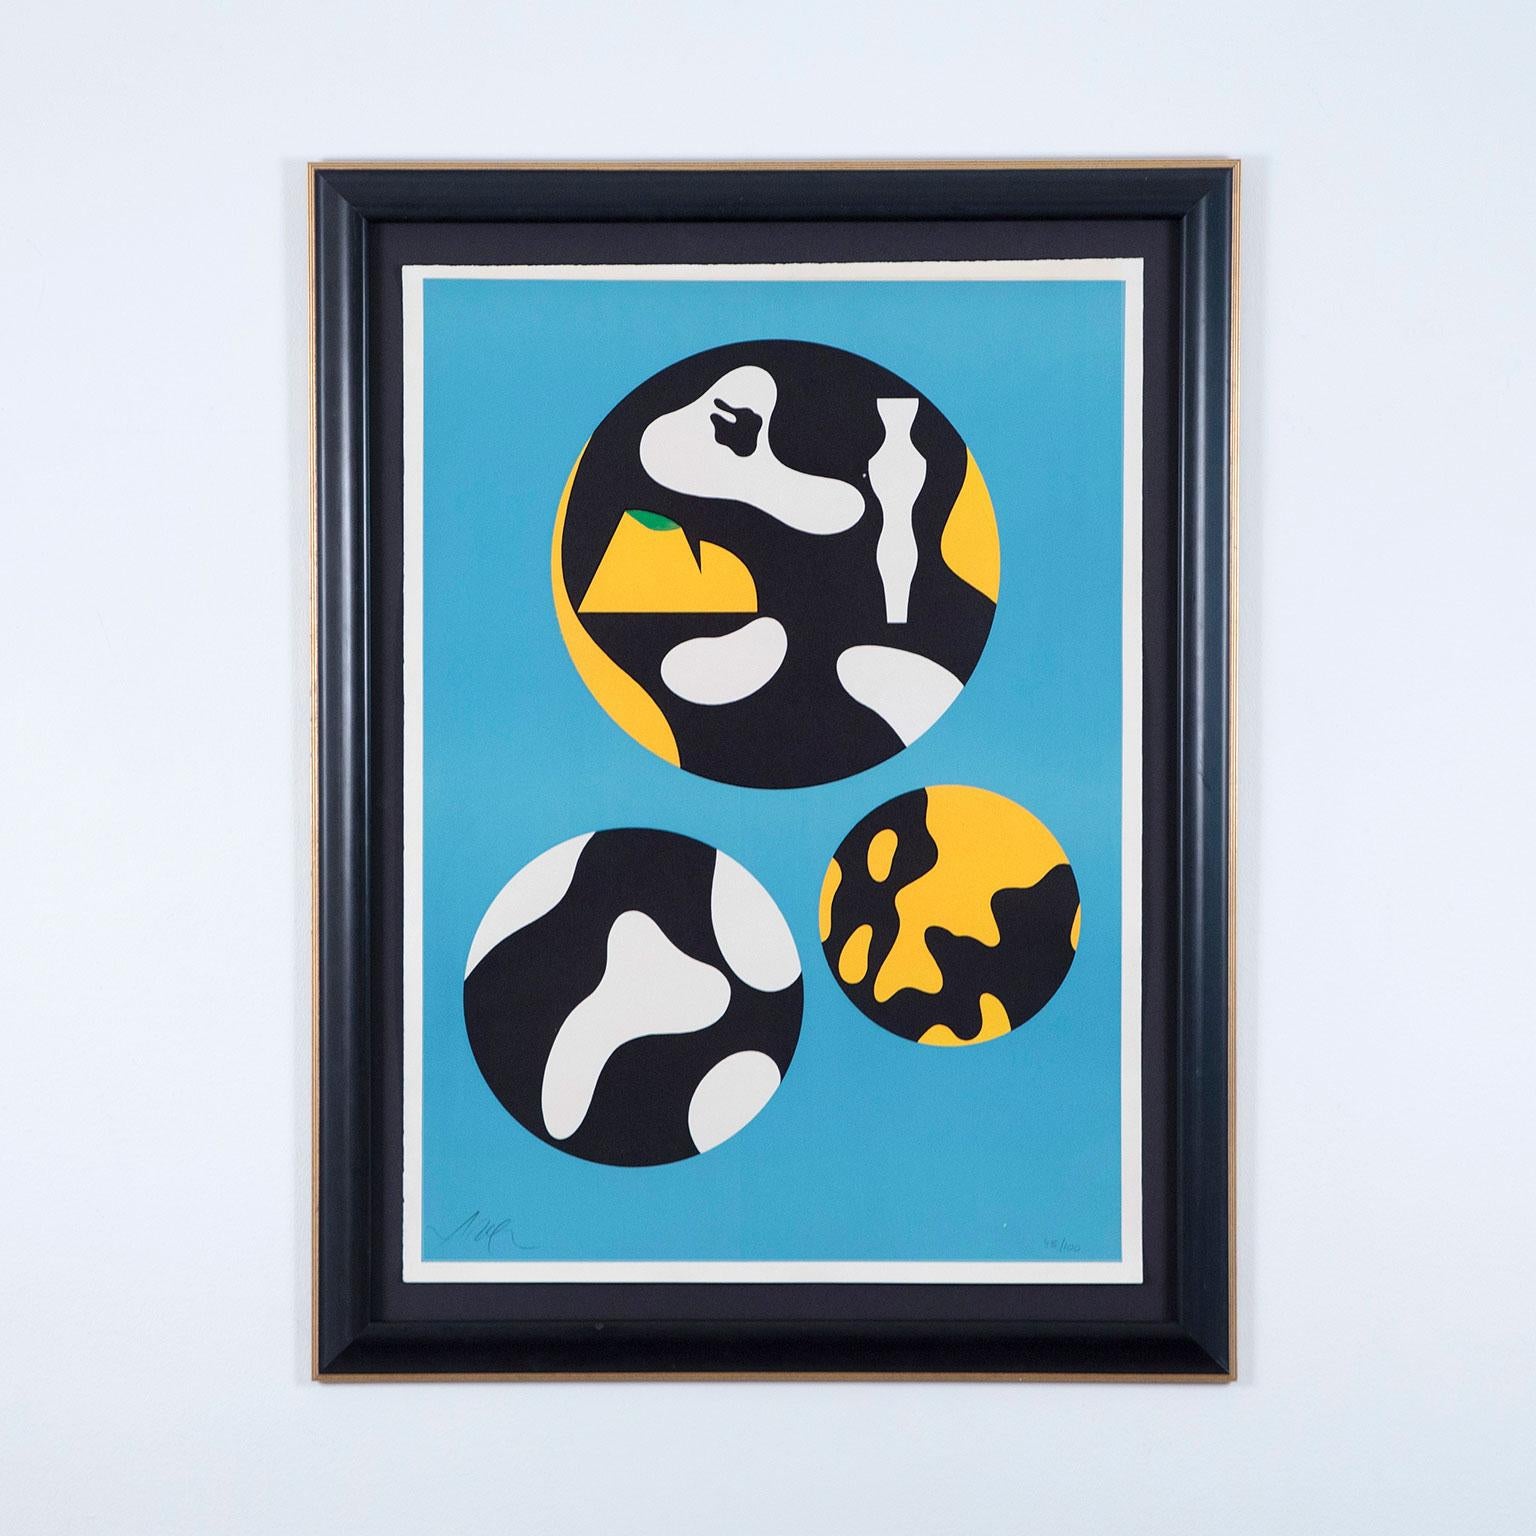 Jean Arp - Artist Biography and Price History on 1stDibs | arp artist, dada  artist jean, dadaist jean arp